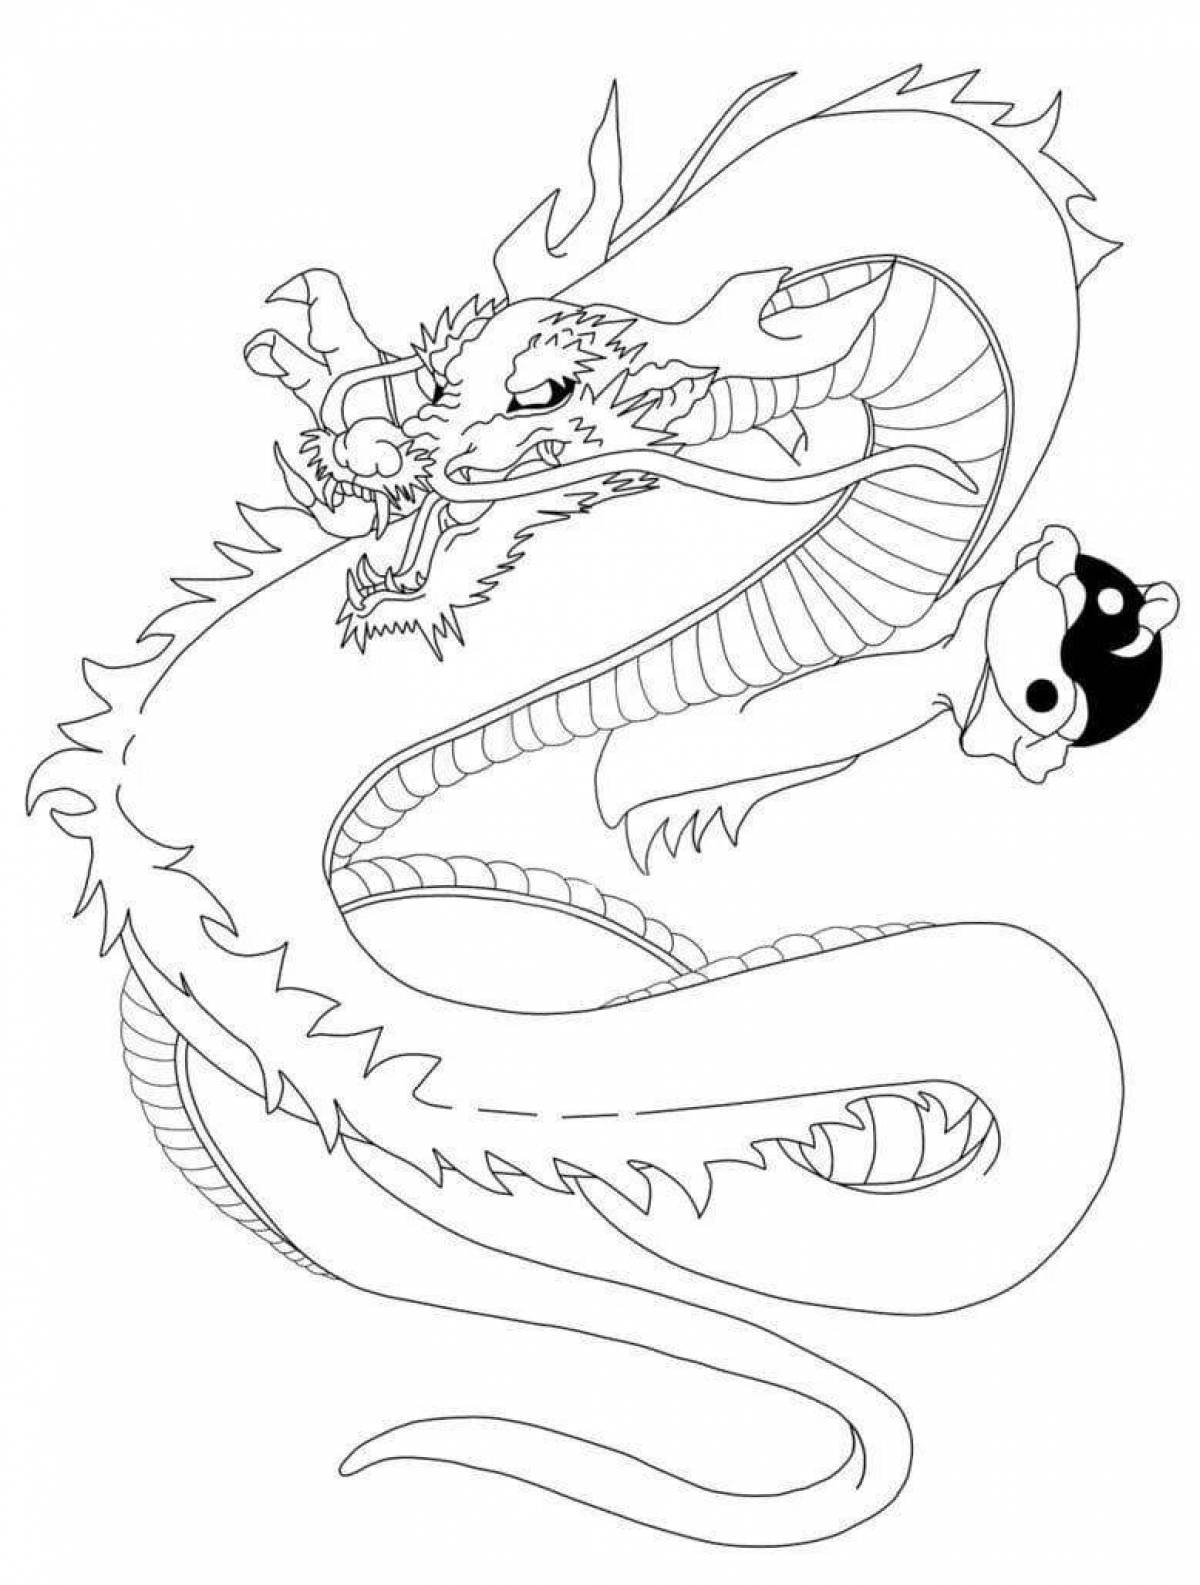 Majestic Japanese dragon coloring page